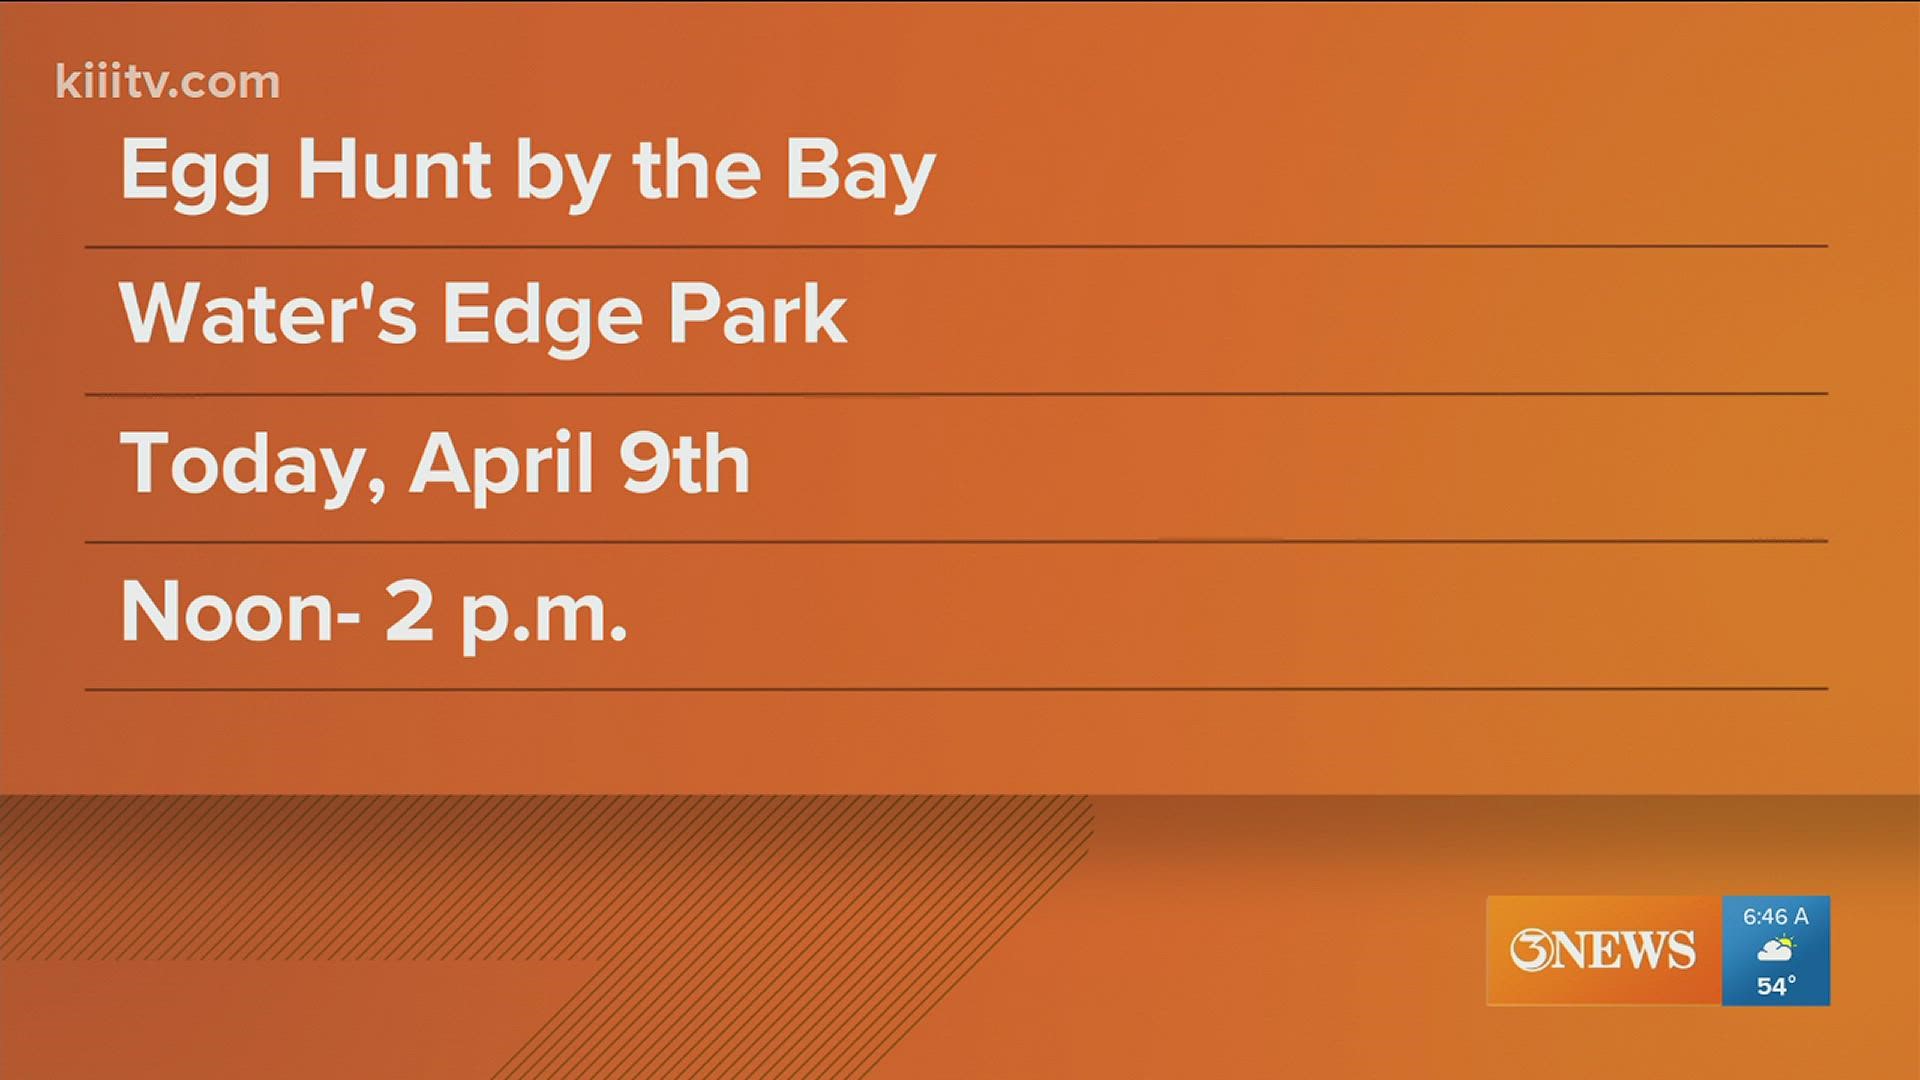 Easter came early to the Coastal Bend with an Egg Hunt by the Bay, Saturday Apr. 9.